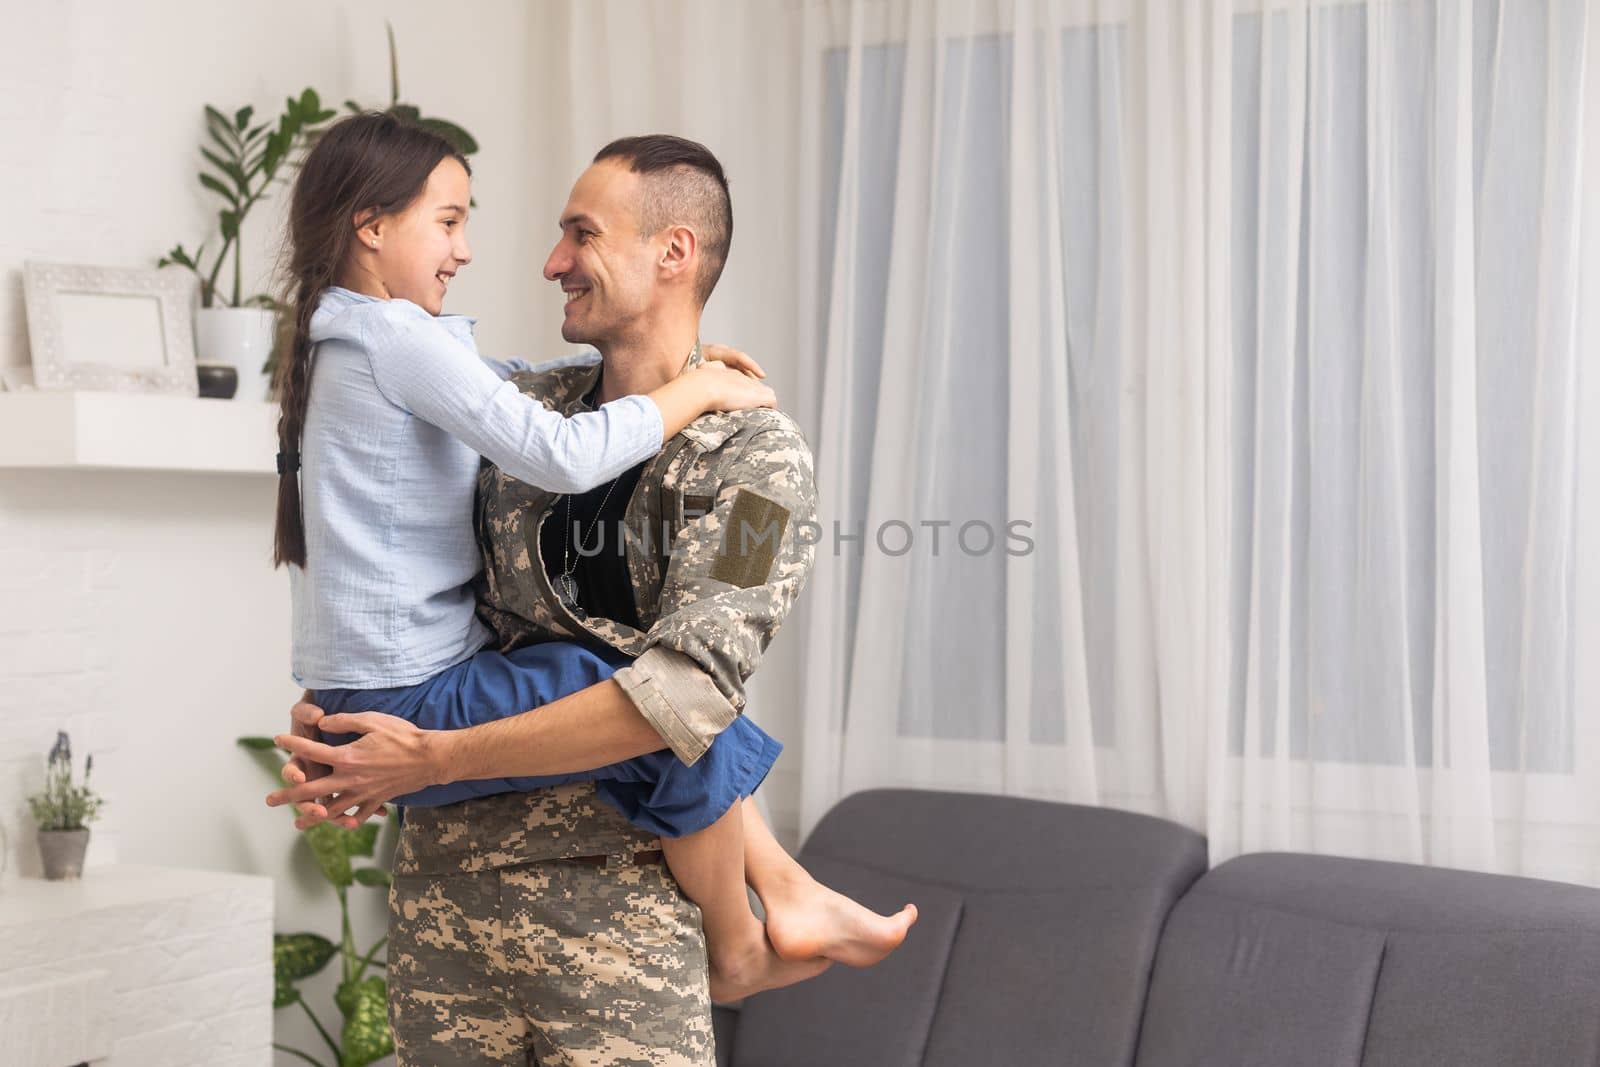 military father hugging his daughter